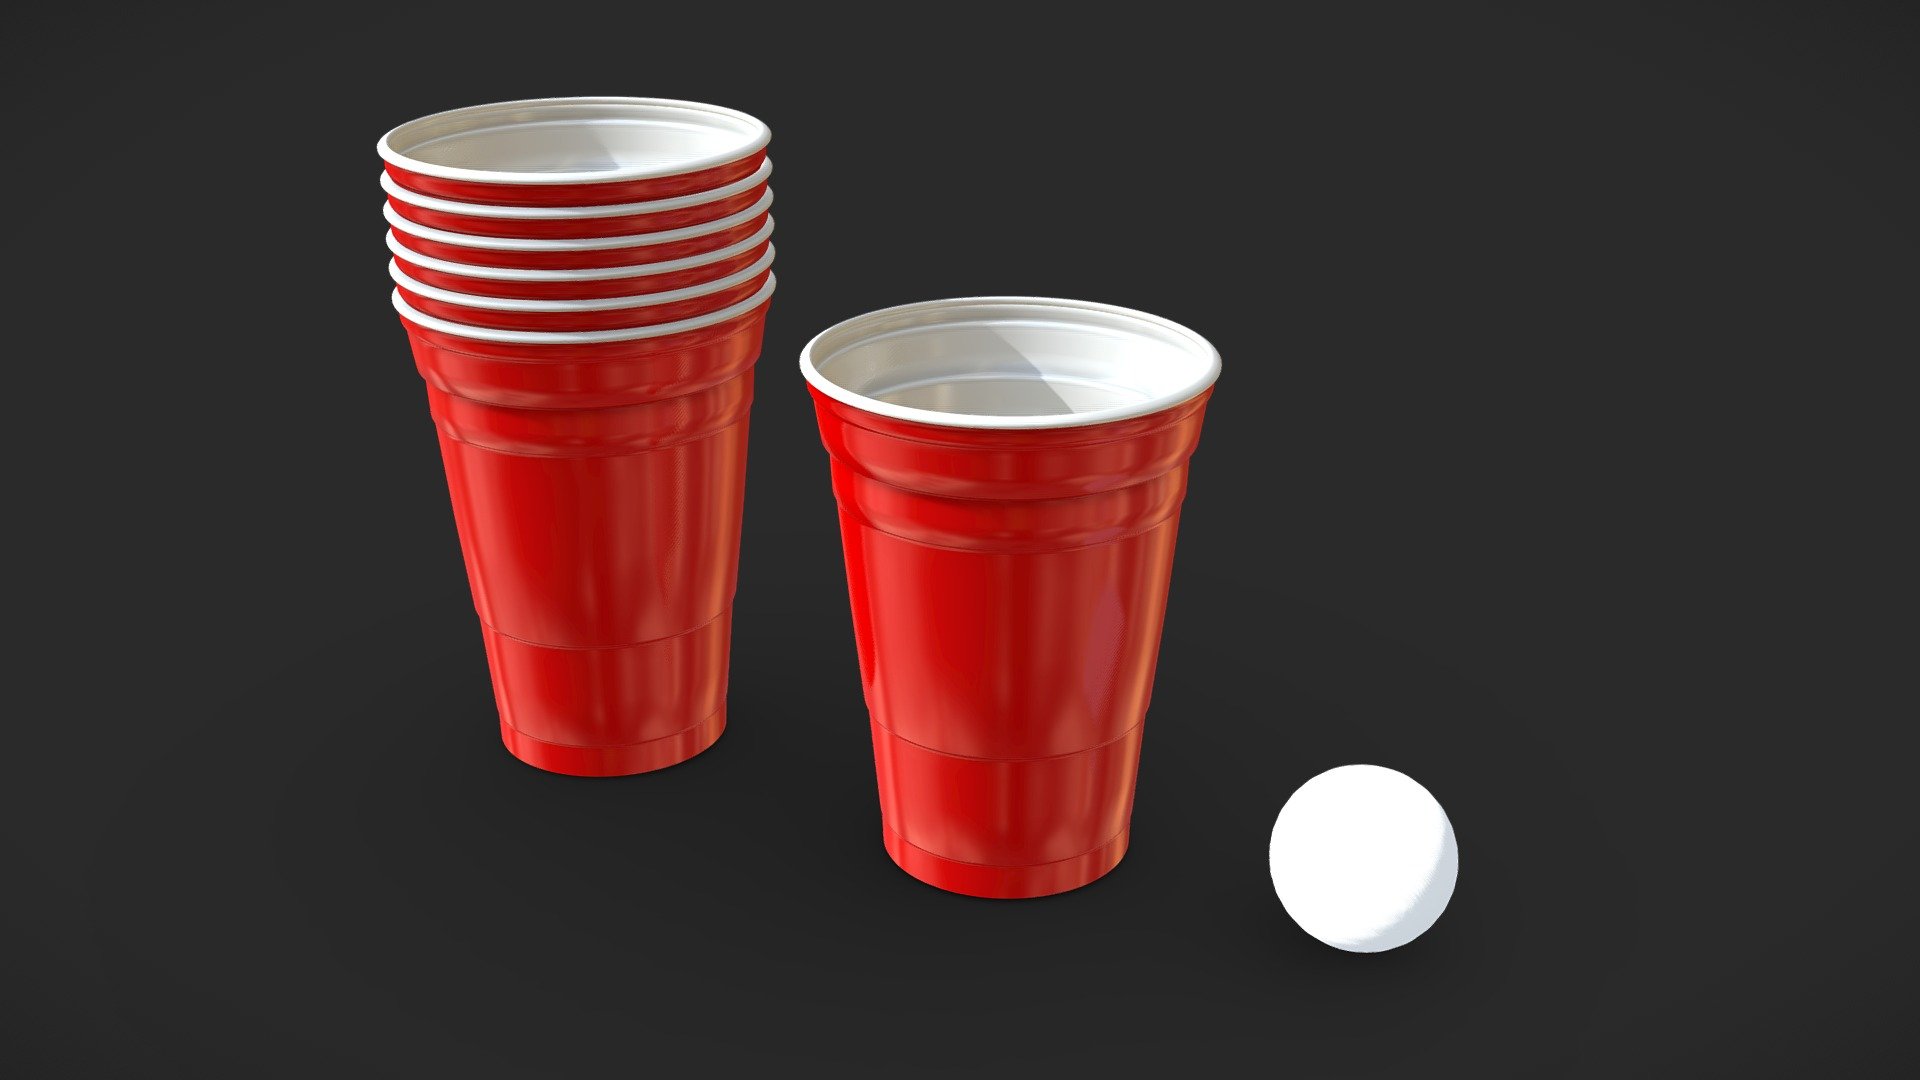 This comes with a Red Cup, Red Cup Stack and Ping Pong Ball. 
Highpoly. 

Table and variations not included in this pack, check my page for more models like this one including - Red Solo Cup Pack - Beer Pong - Buy Royalty Free 3D model by Unreal Designer (@unrealdesigner.ig) 3d model